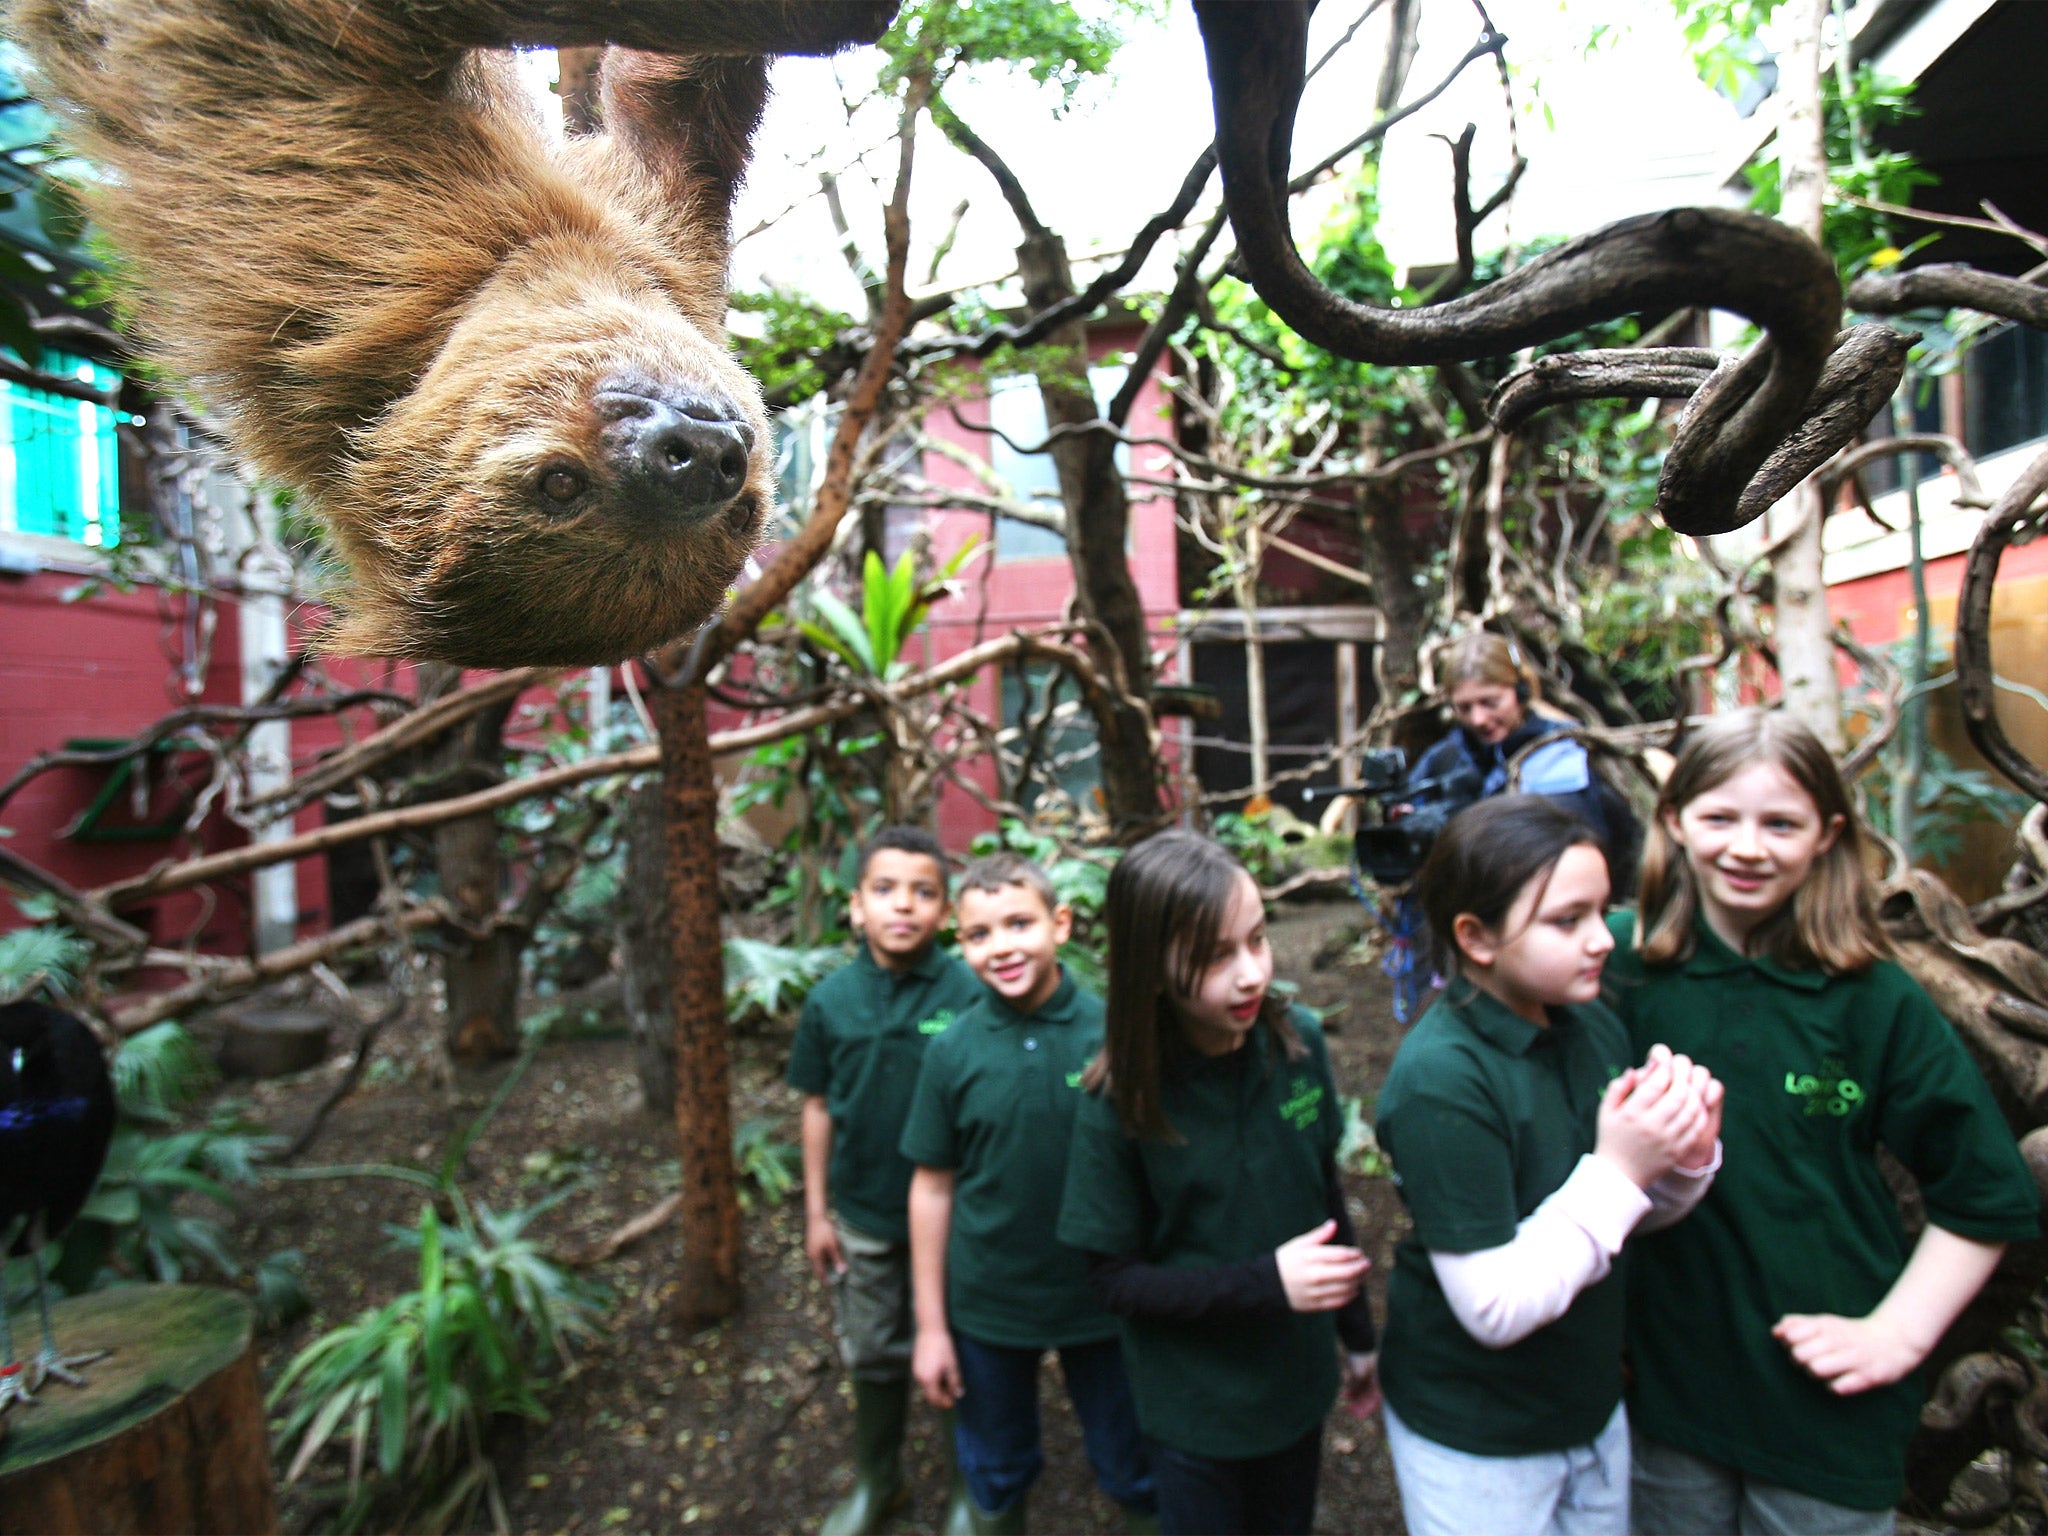 Close encounters with animals inspired pupils to write to much higher standards